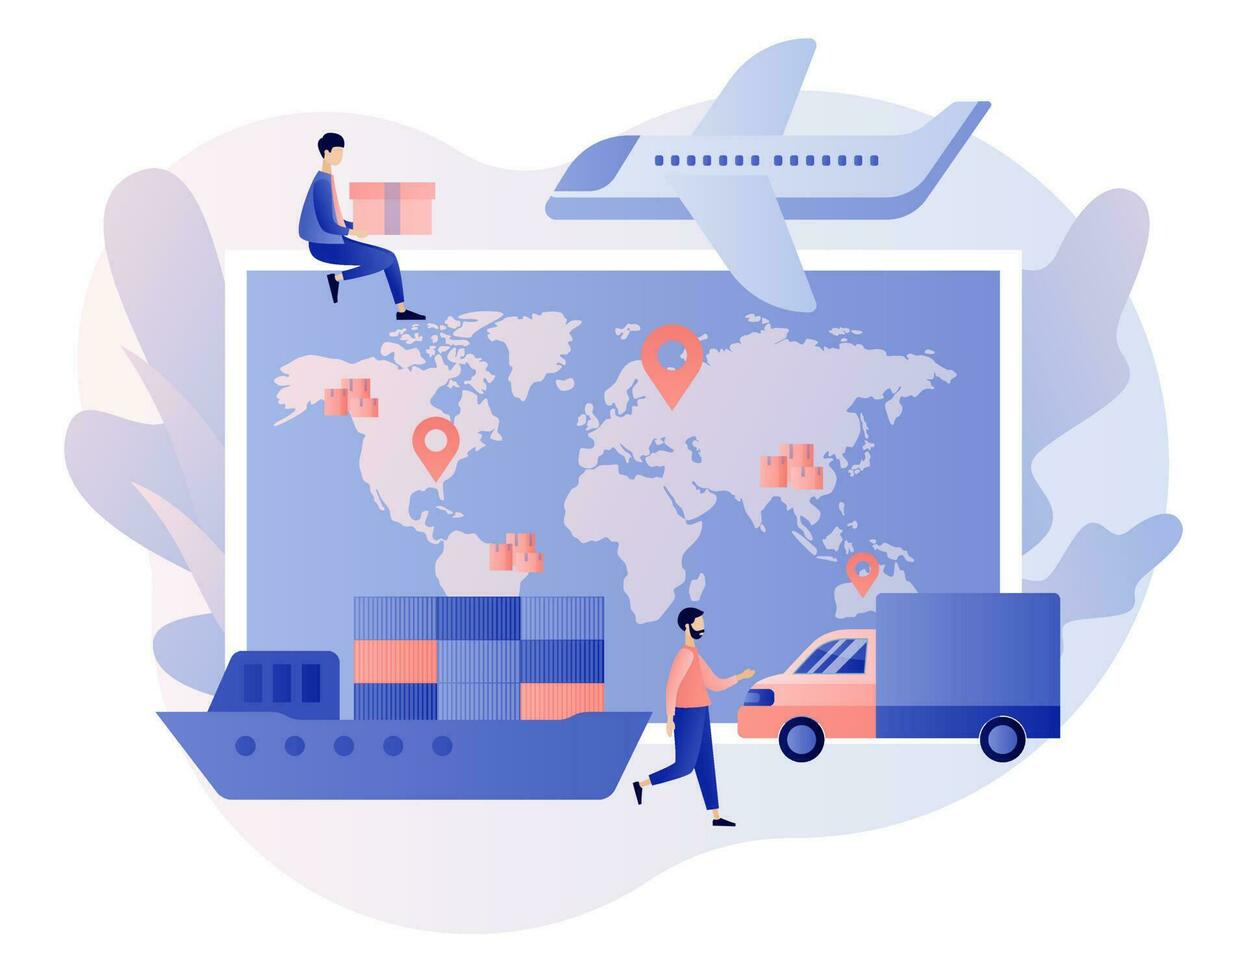 Global logistics network. Export, import, warehouse business, transportation. Business logistics. Vehicles to carry of cargo. On-time delivery. Modern flat cartoon style. Vector illustration